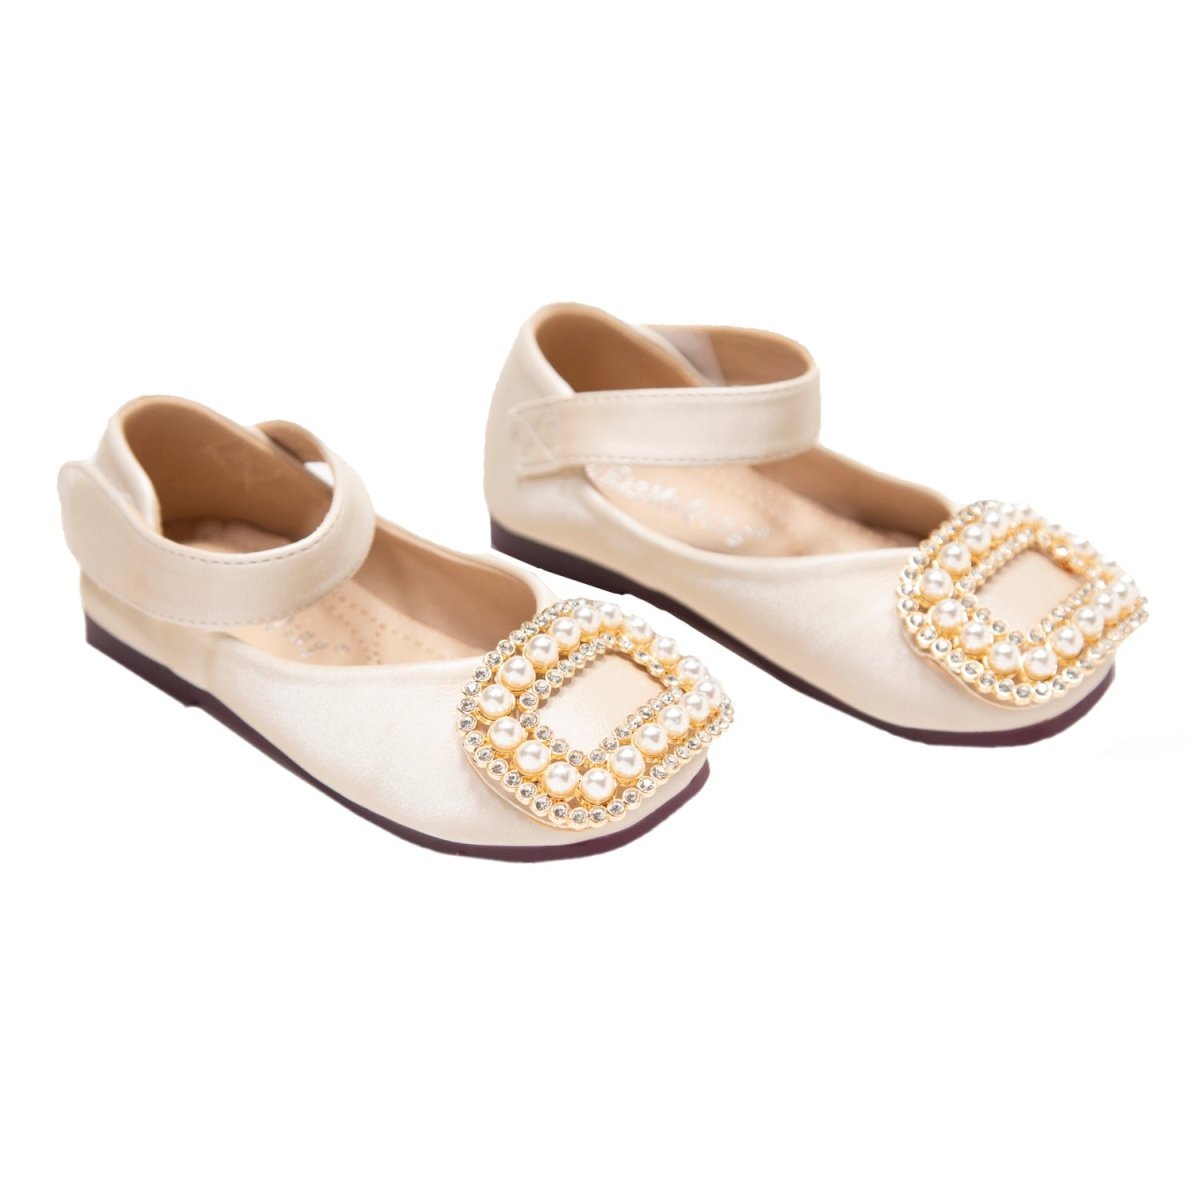 ROGER CRYSTAL SQUARE SHOES - FLATS